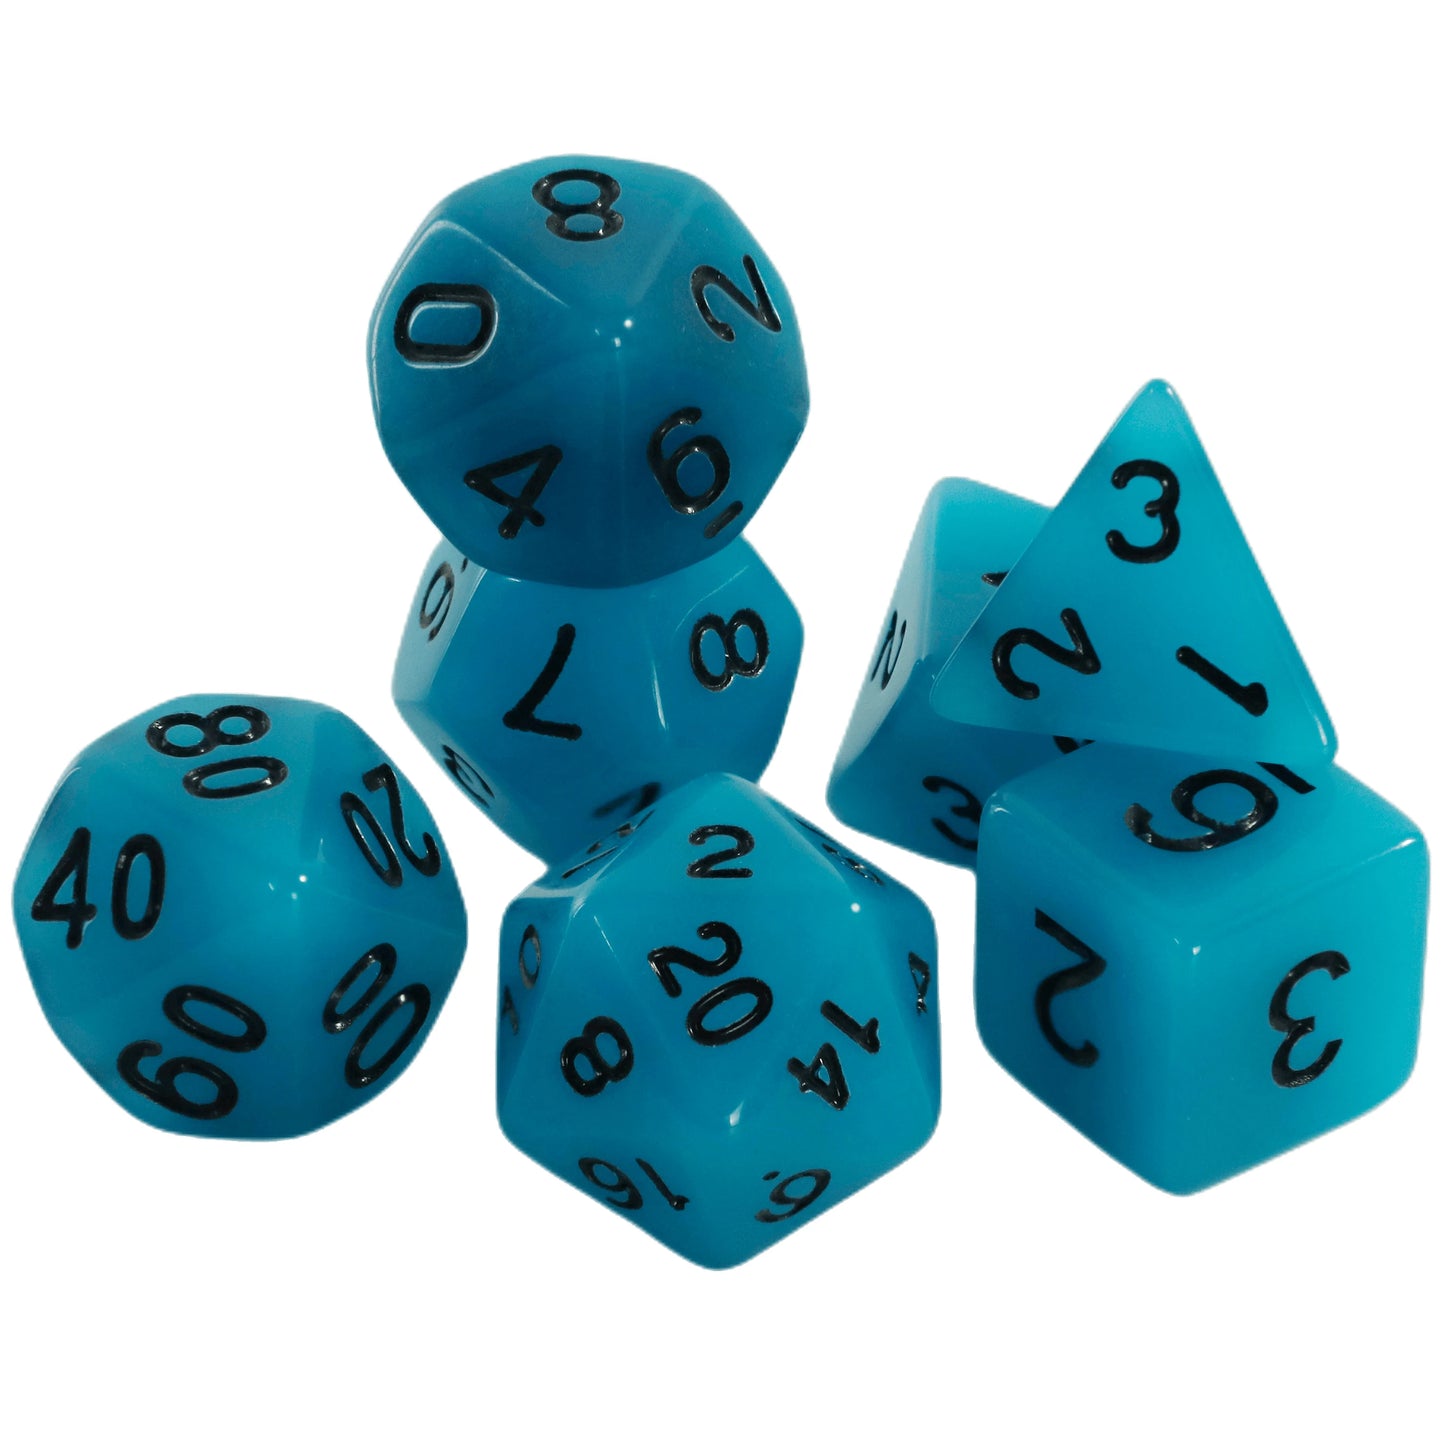 7pcs Polyhedral Dice Set with Glow-in-dark Effect and Clear Numbers Easy to Roll for Board Games DND ,RPG and Parties Games